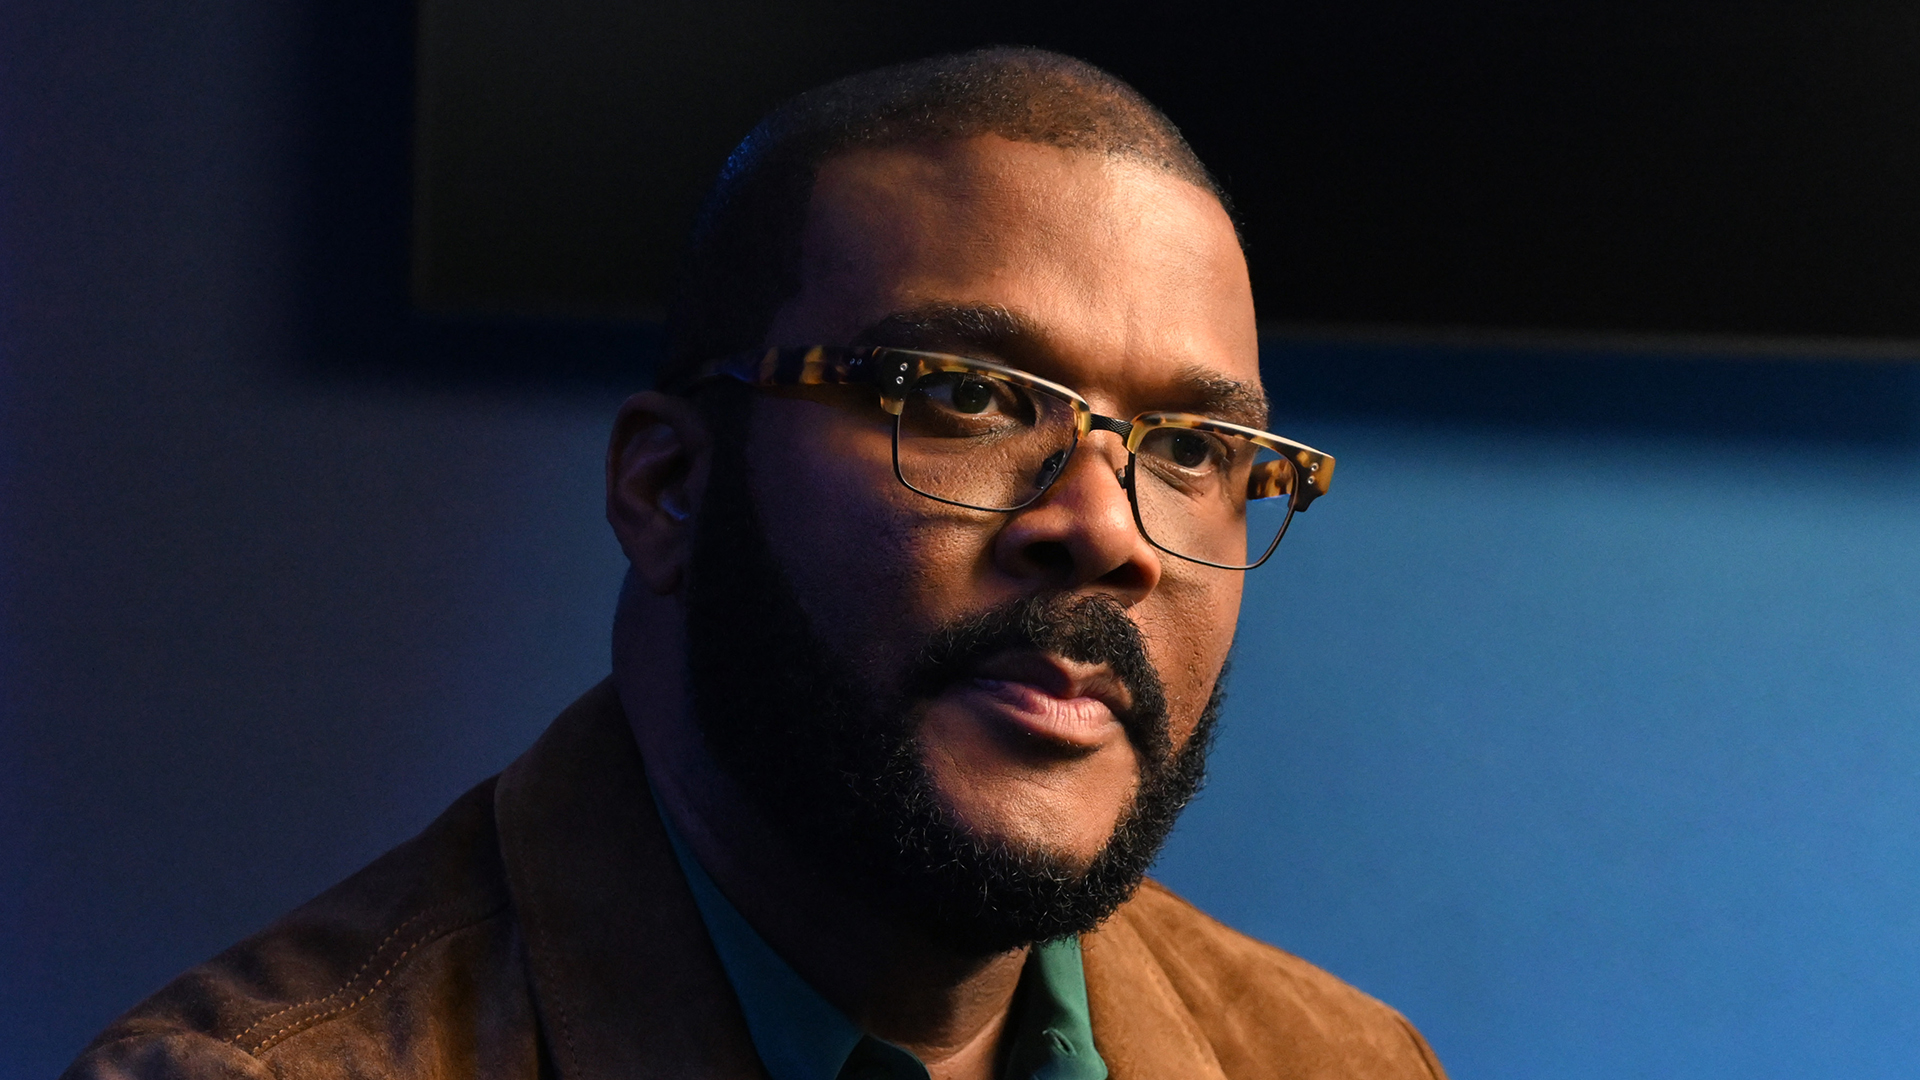 Billionaire Tyler Perry Feels The Bidding Process For BET Was 'Disrespectful'